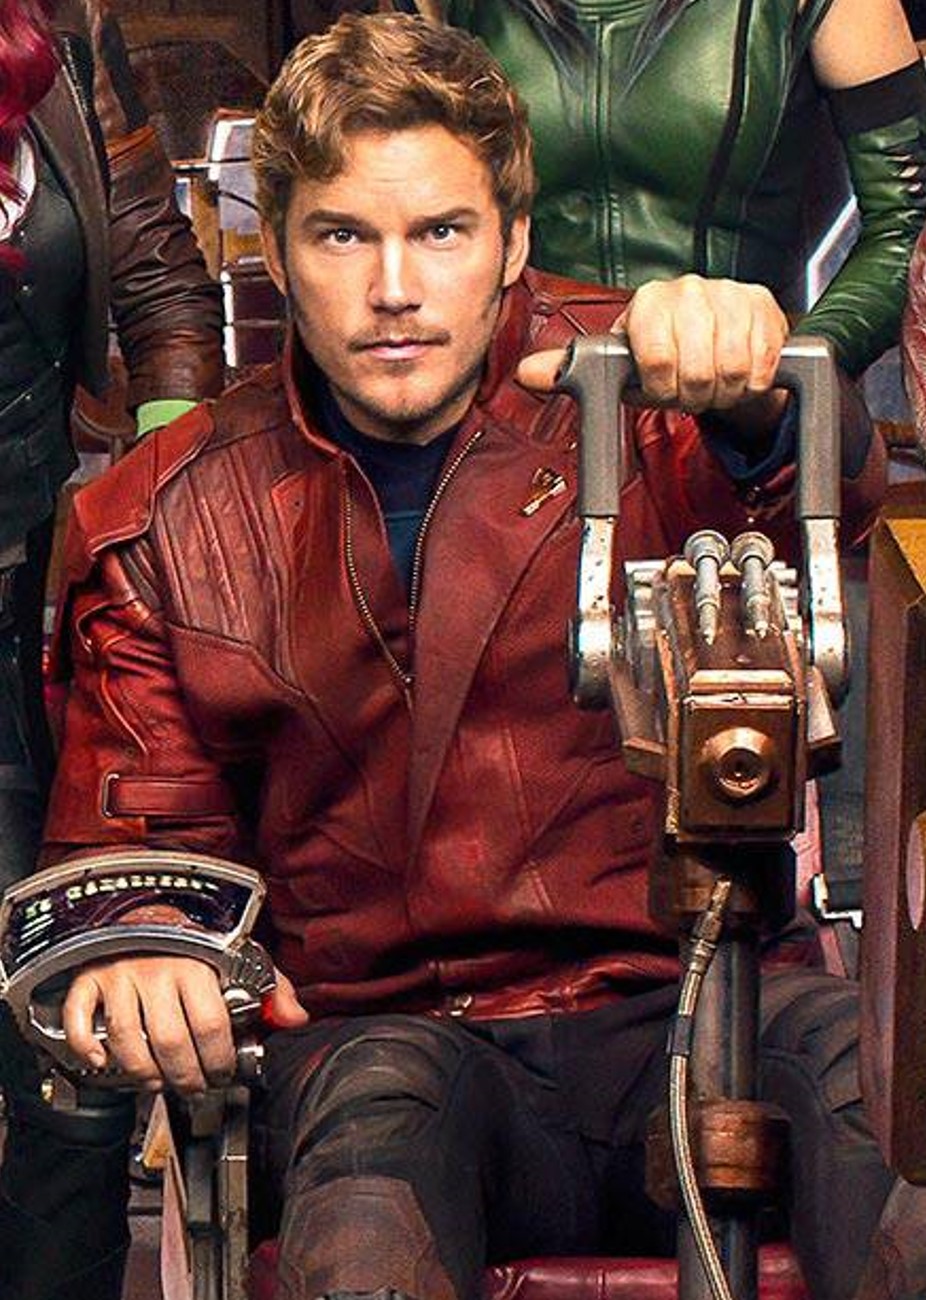 Guardians Of The Galaxy Vol 2: How The Power Stone Changed Star Lord